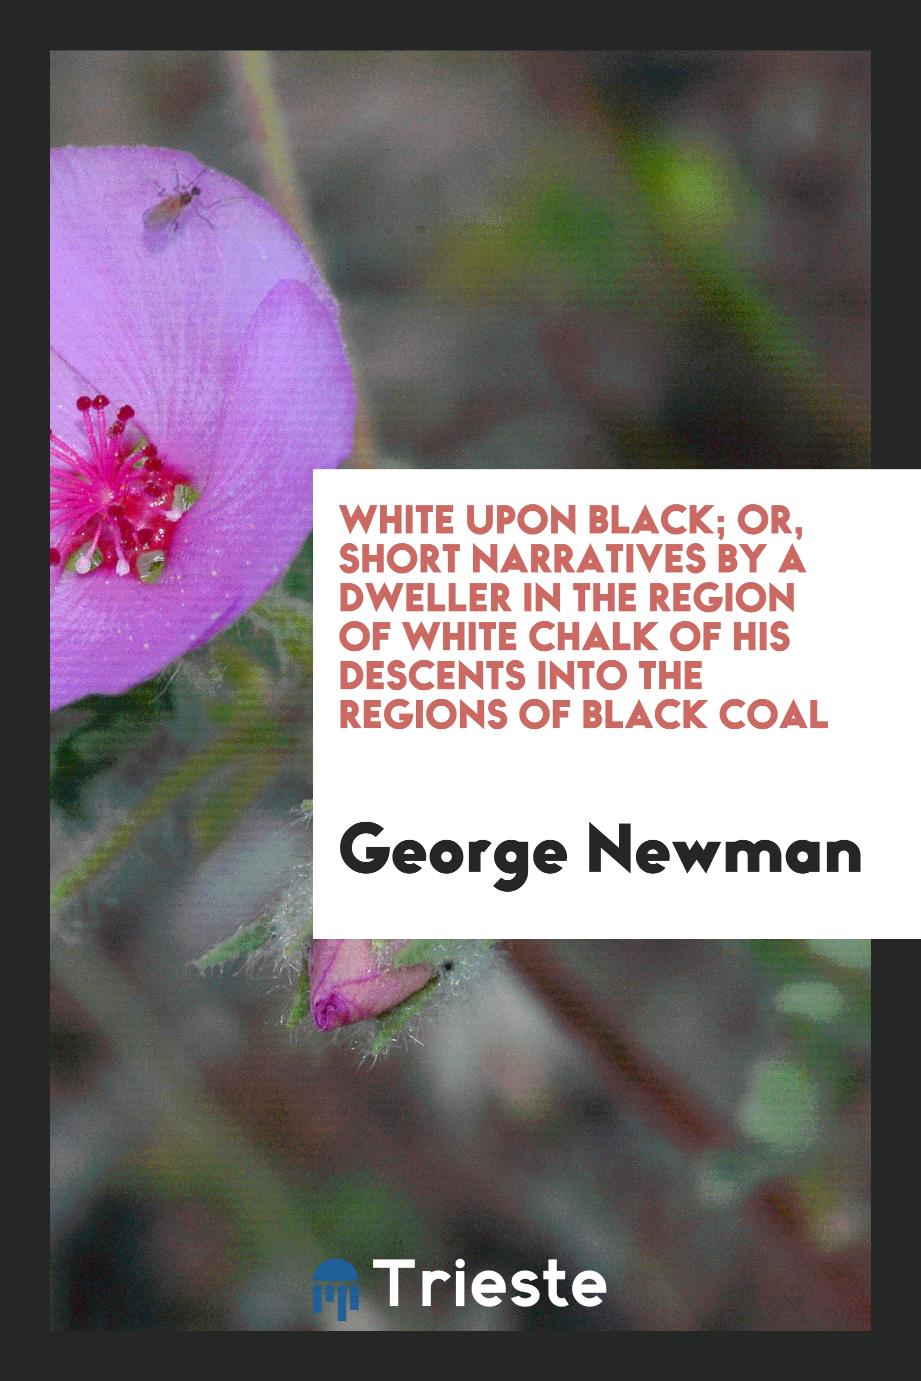 White upon black; or, short narratives by a dweller in the region of white chalk of his descents into the regions of black coal